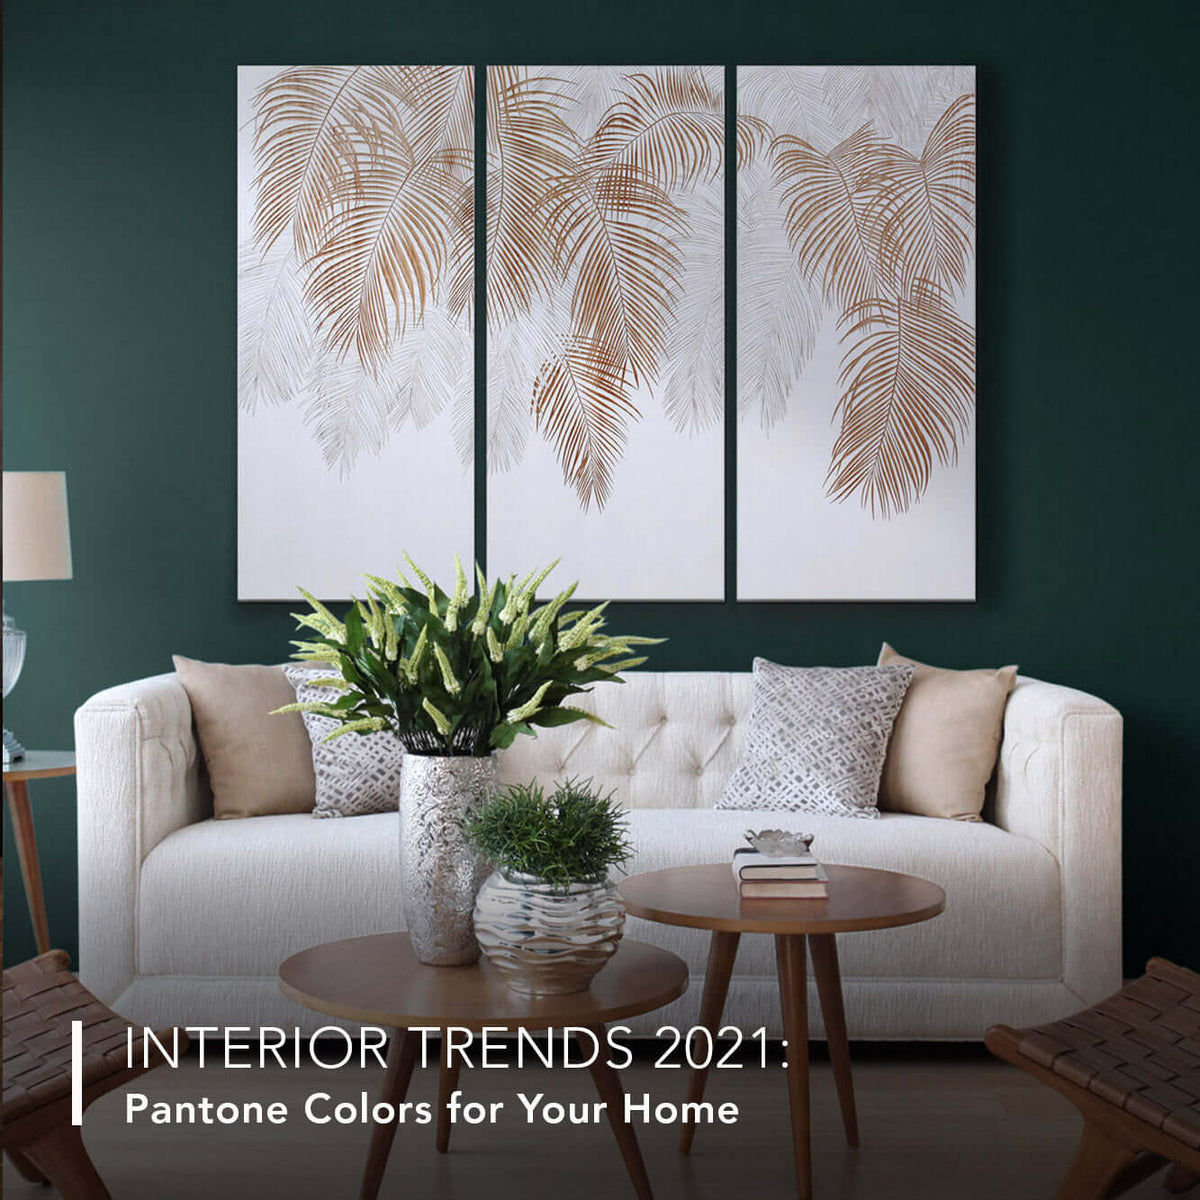 Interior Trends 2021: Pantone Colors for Your Home